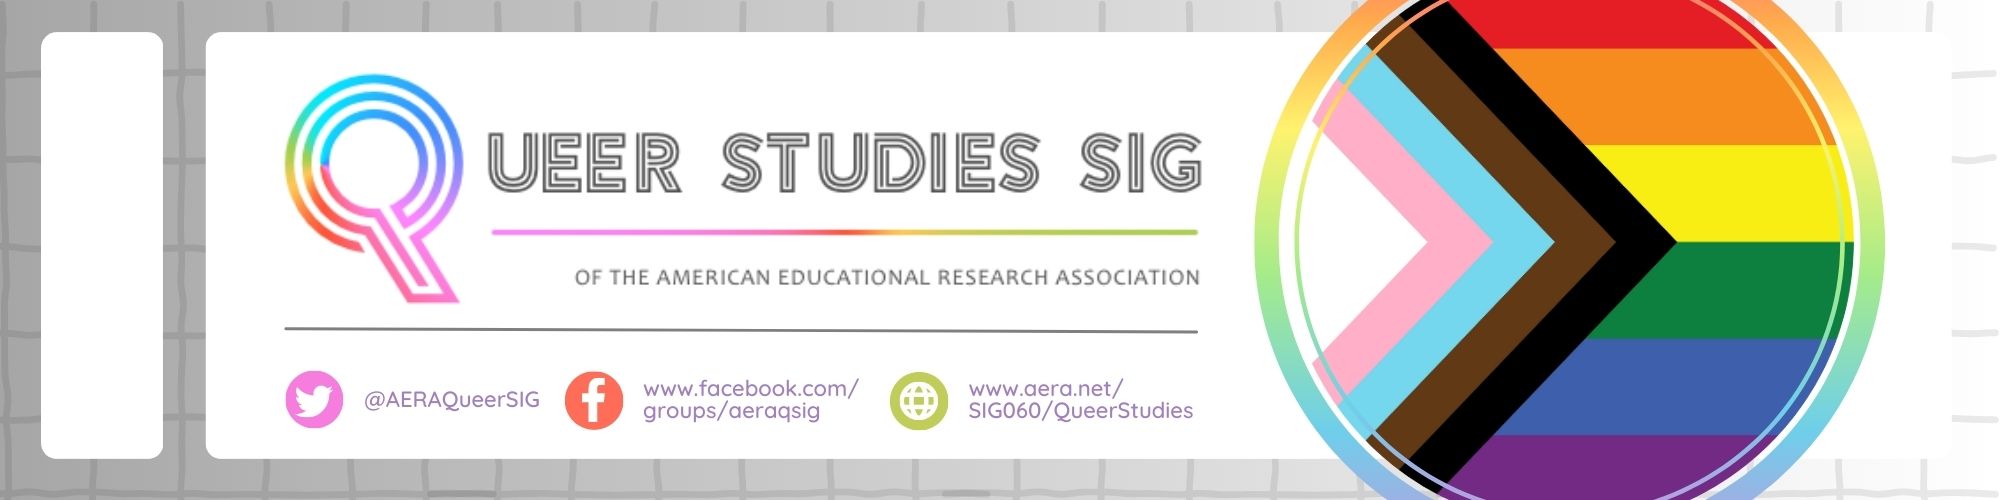 AERA_Queer_SIG_Contact_Info_Banner__7_5___3_in_